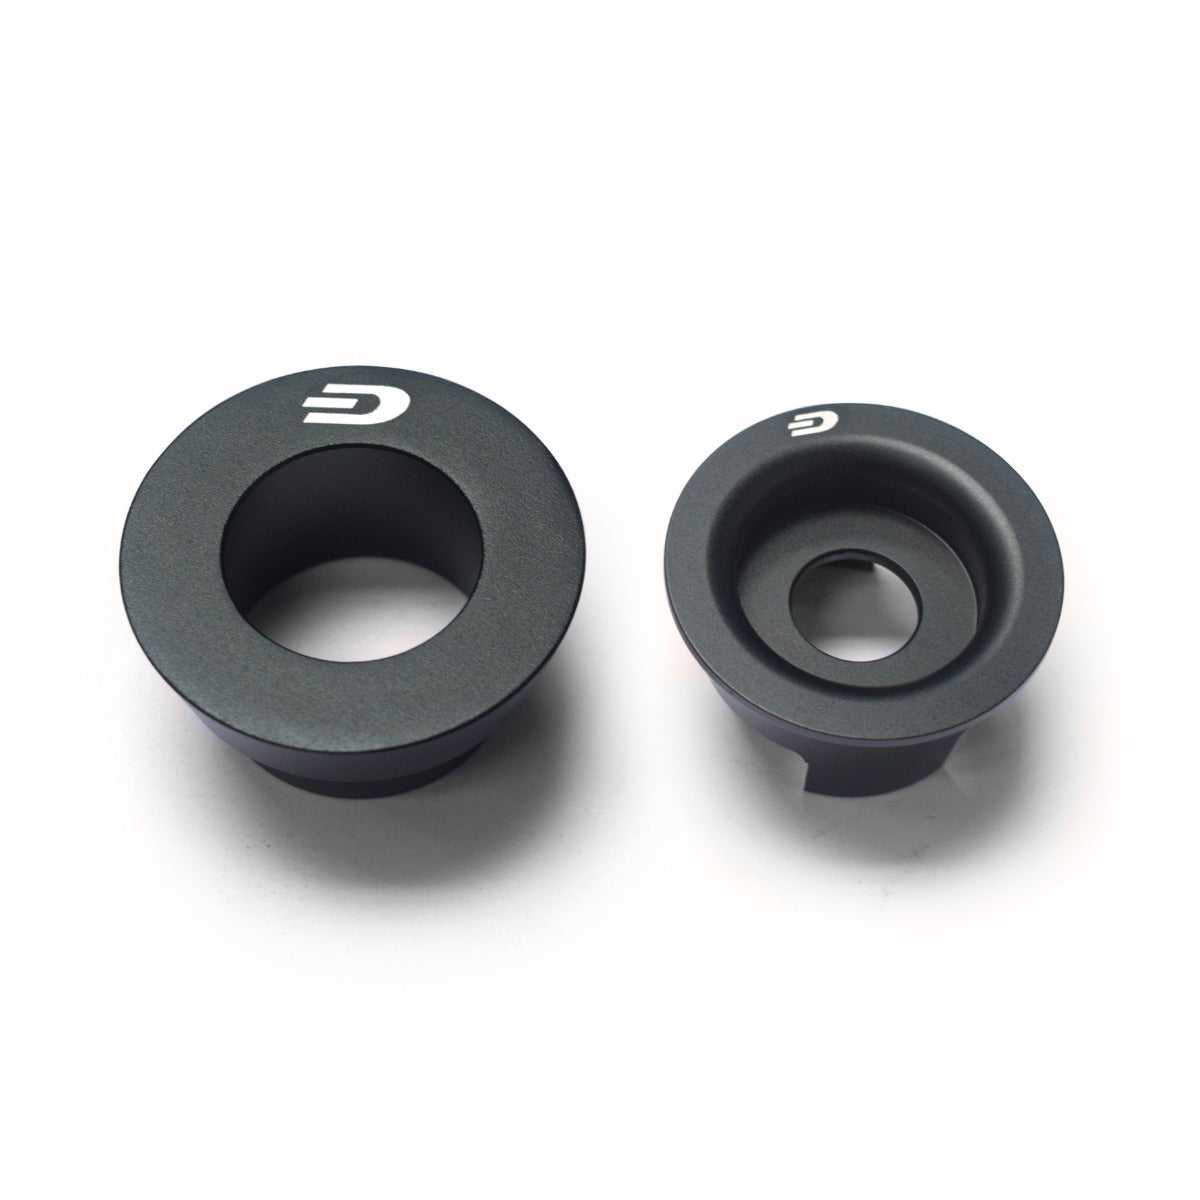 Direnza, Direnza - Audi A4 / S4 / RS4 / B8 / B8.5 09-17 - Front Differential Mount Inserts